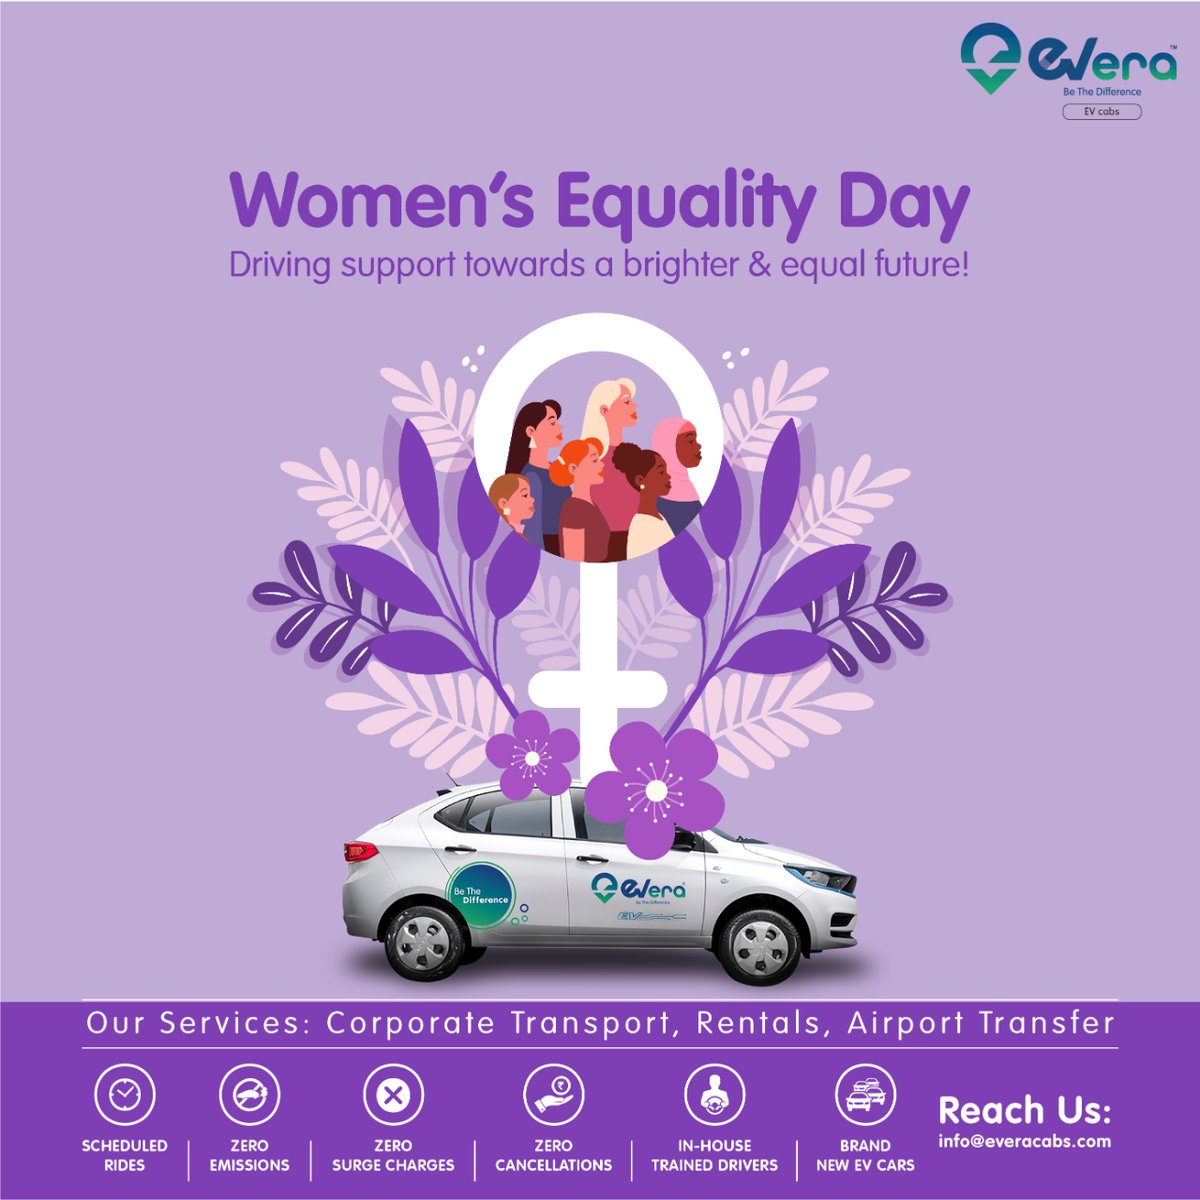 Empowering women to drive towards a sustainable and impartial society. 
@everacabs 
#WomensEqualityDay #WomensEquality #ReliableRide #zeroemissions #nopollution #ElectricCabs #airporttaxi #saveearth #cabservice #electriccars